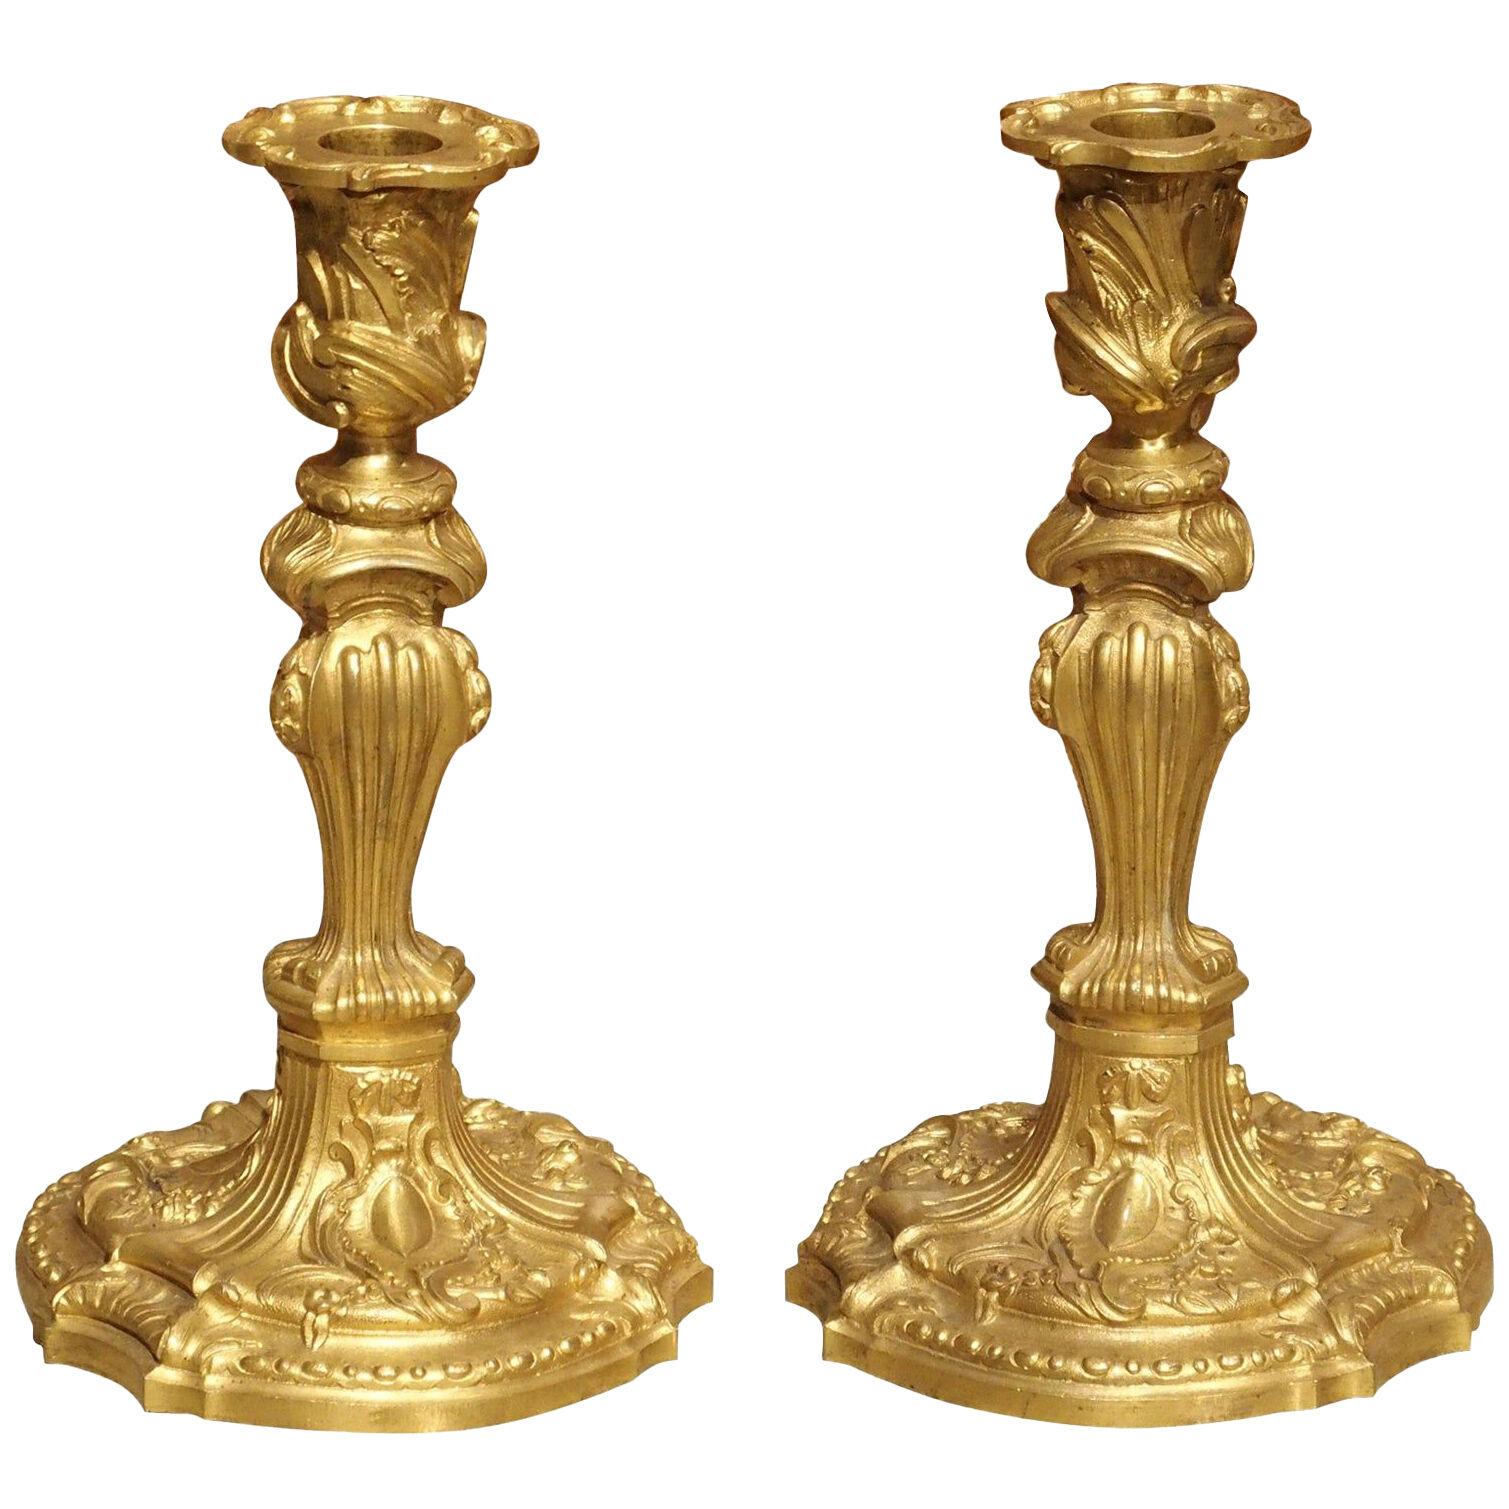 Pair of French Louis XV Style Gilt Bronze Candlesticks, 19th Century